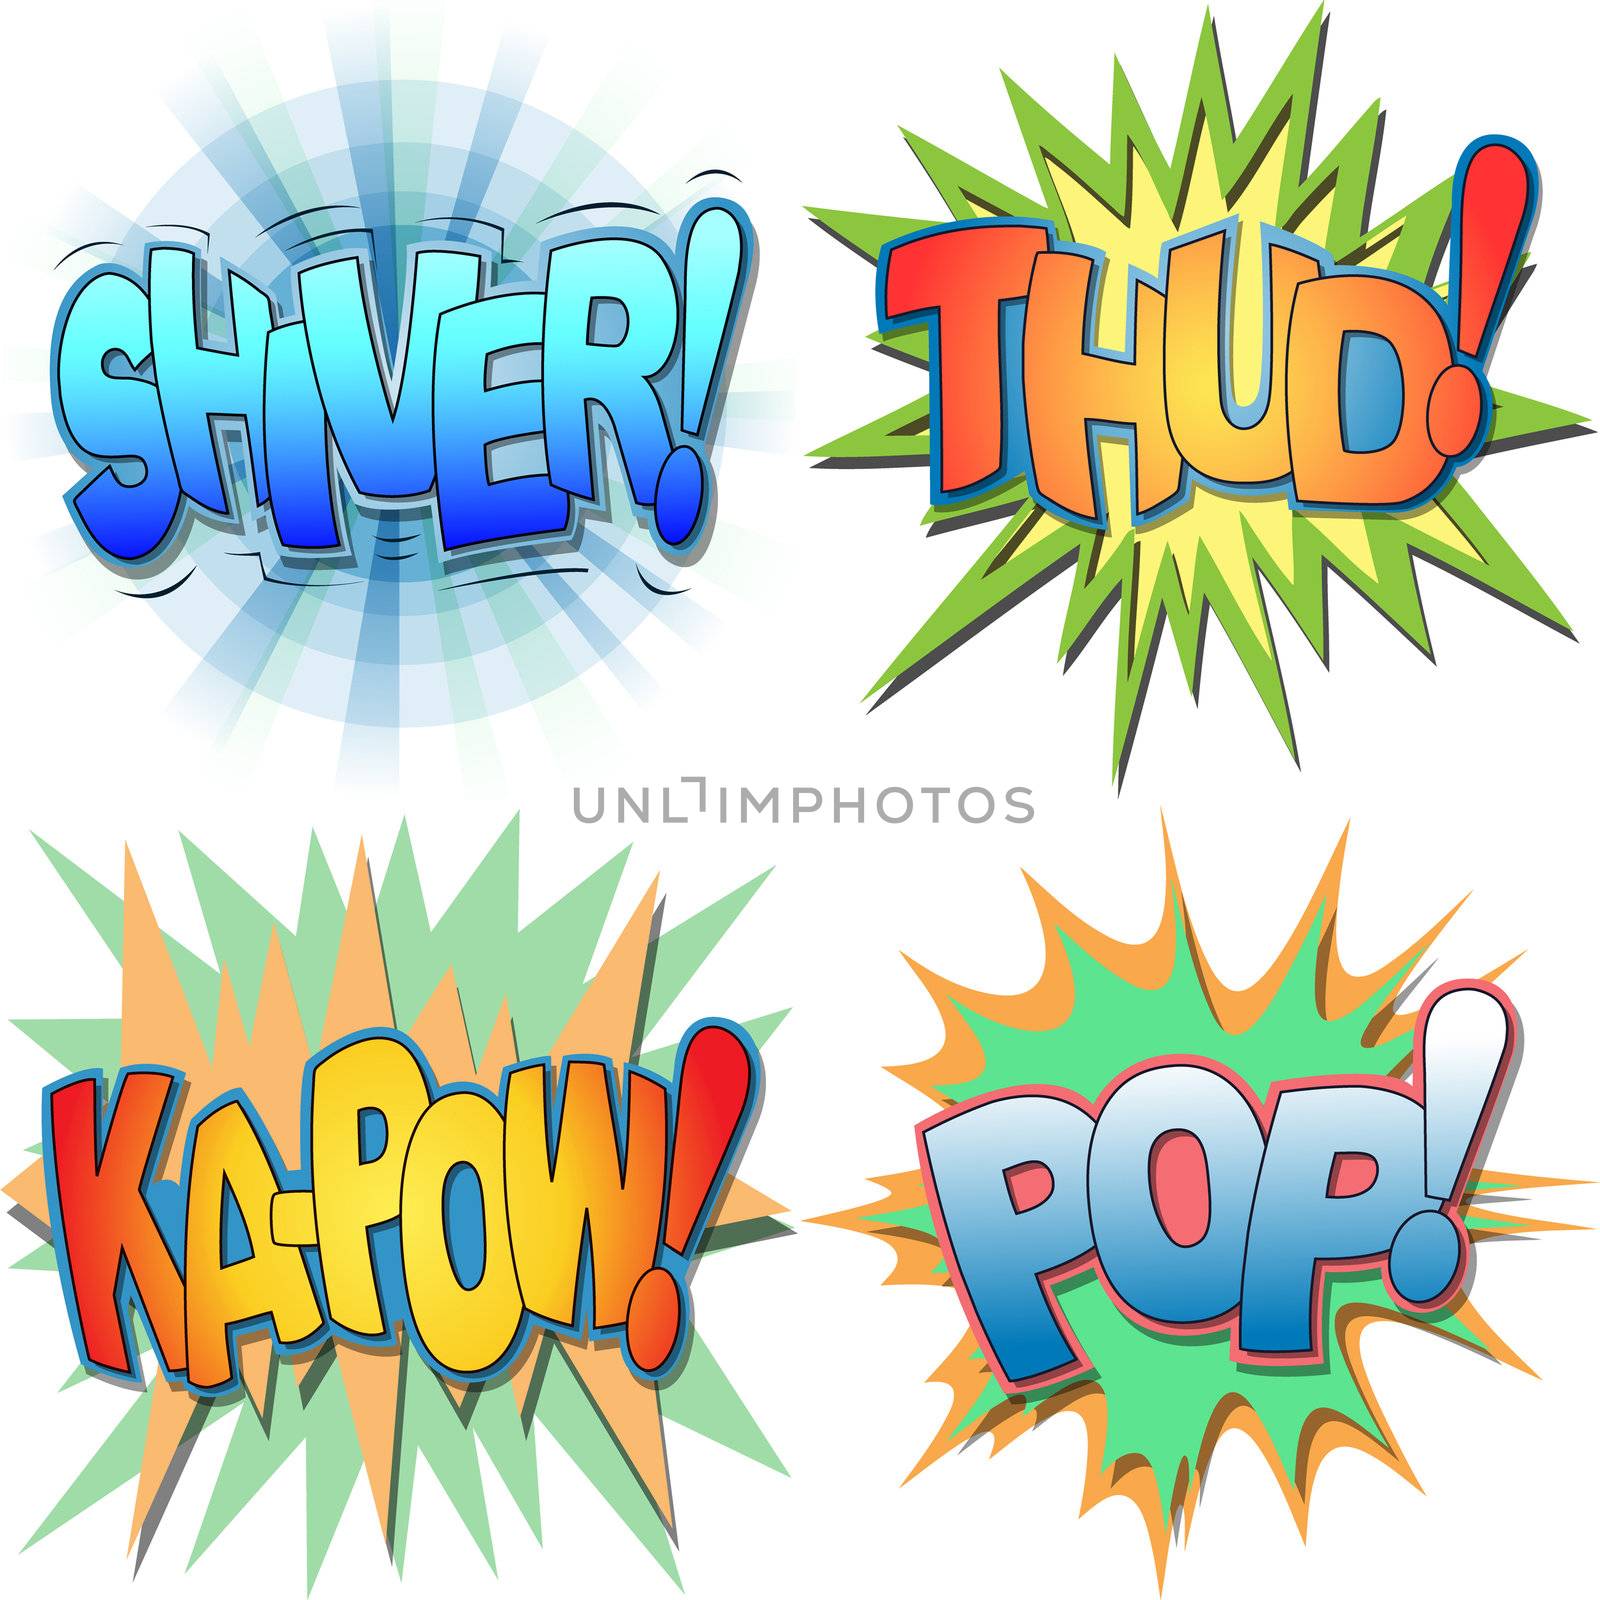 
A Selection of Comic Book Exclamations and Action Words, Shiver, Thud, Ka-pow, Pop.